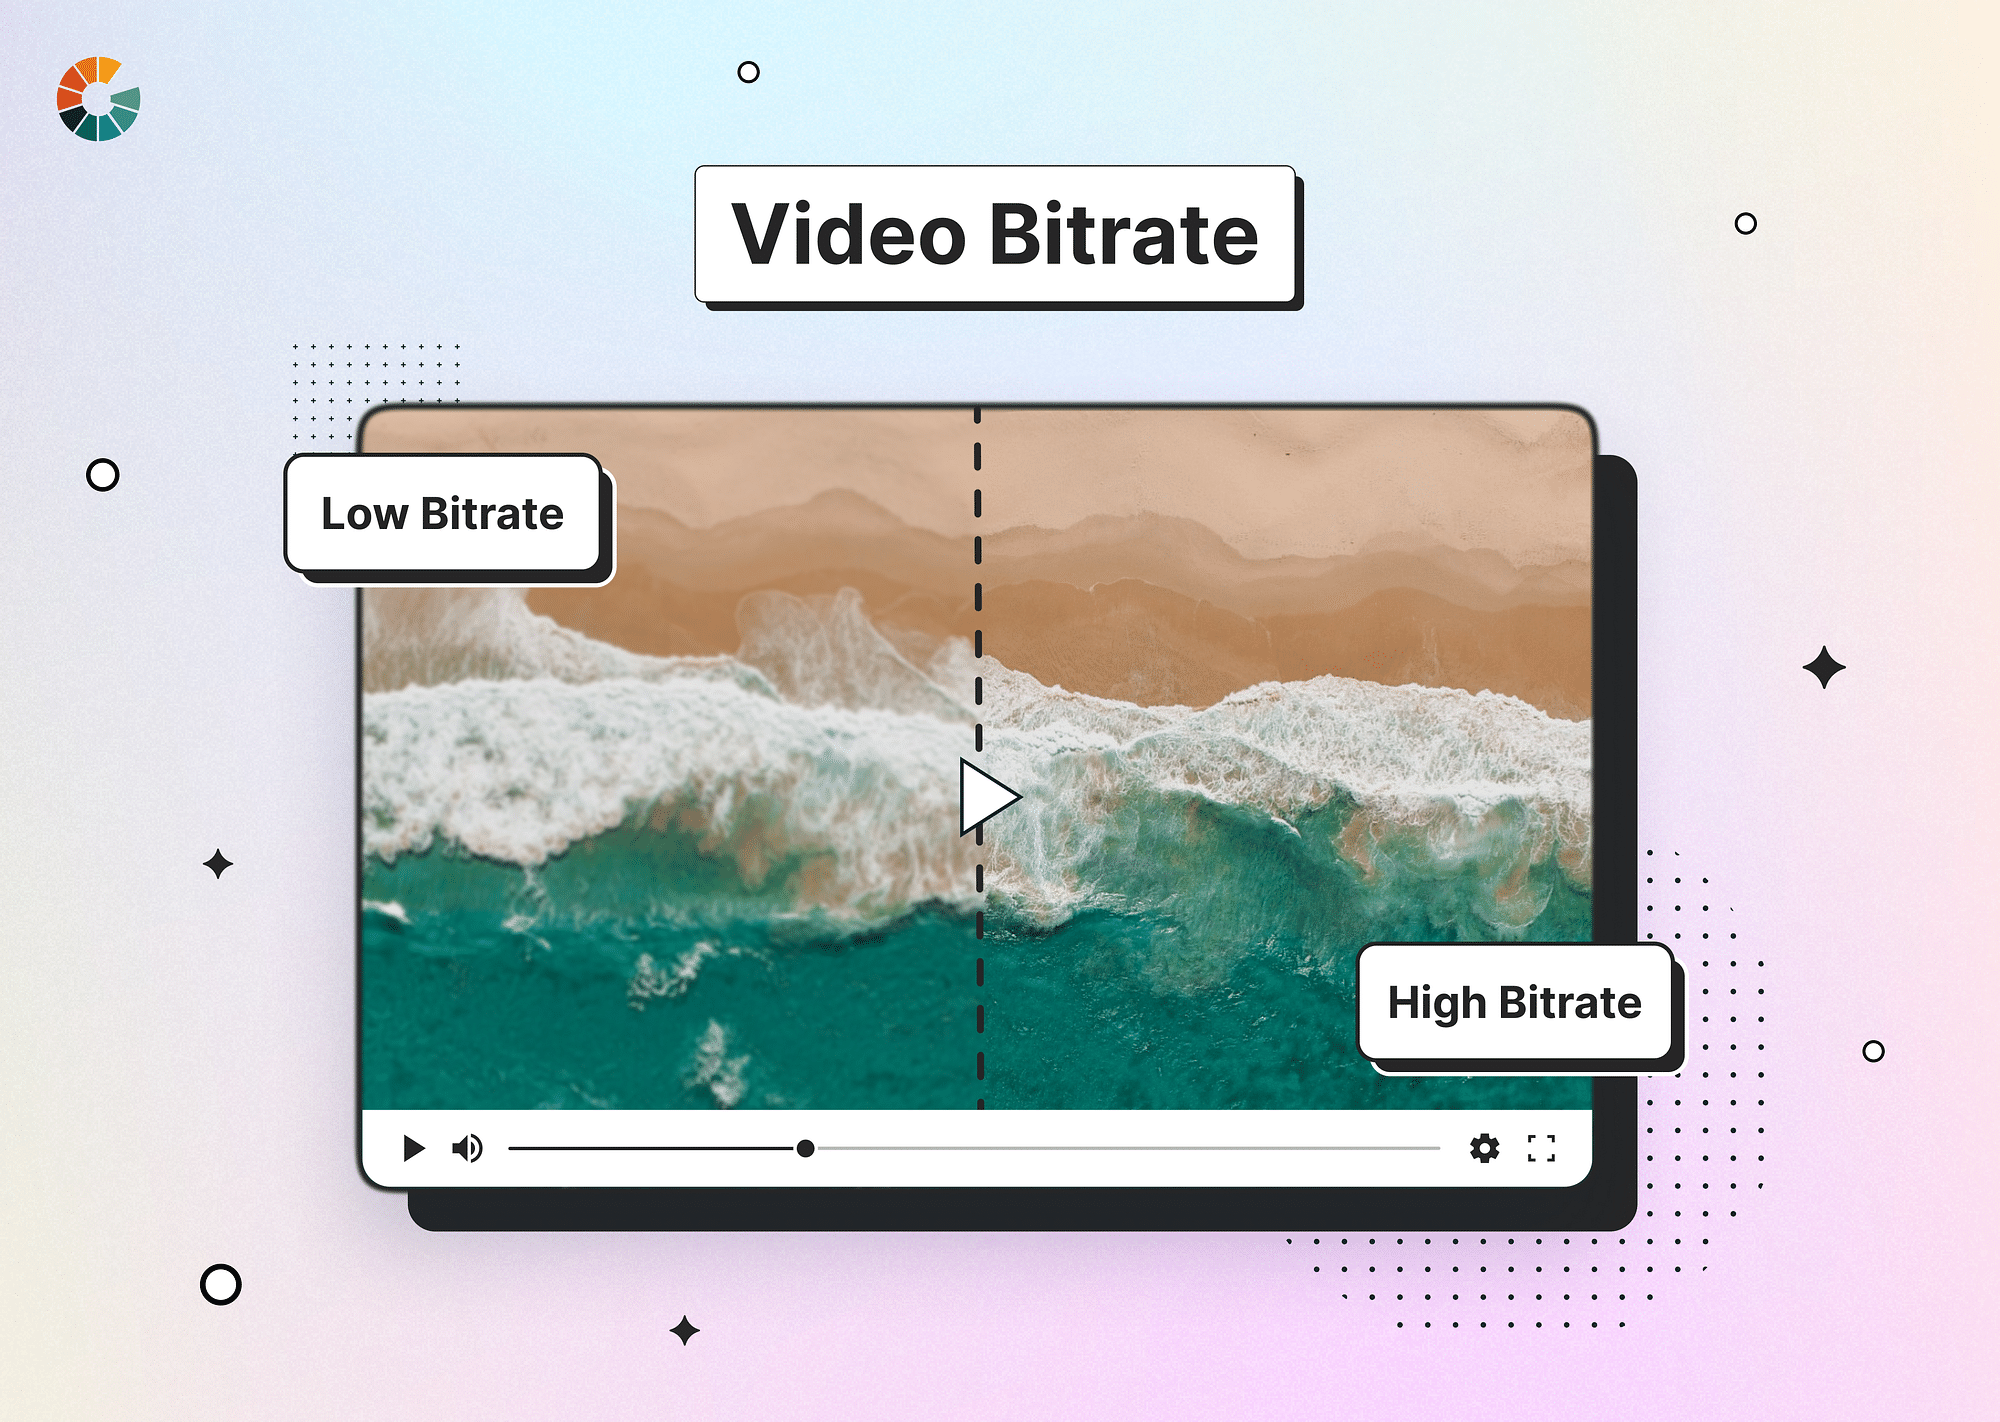 What is the Best Video Bitrate for Streaming?